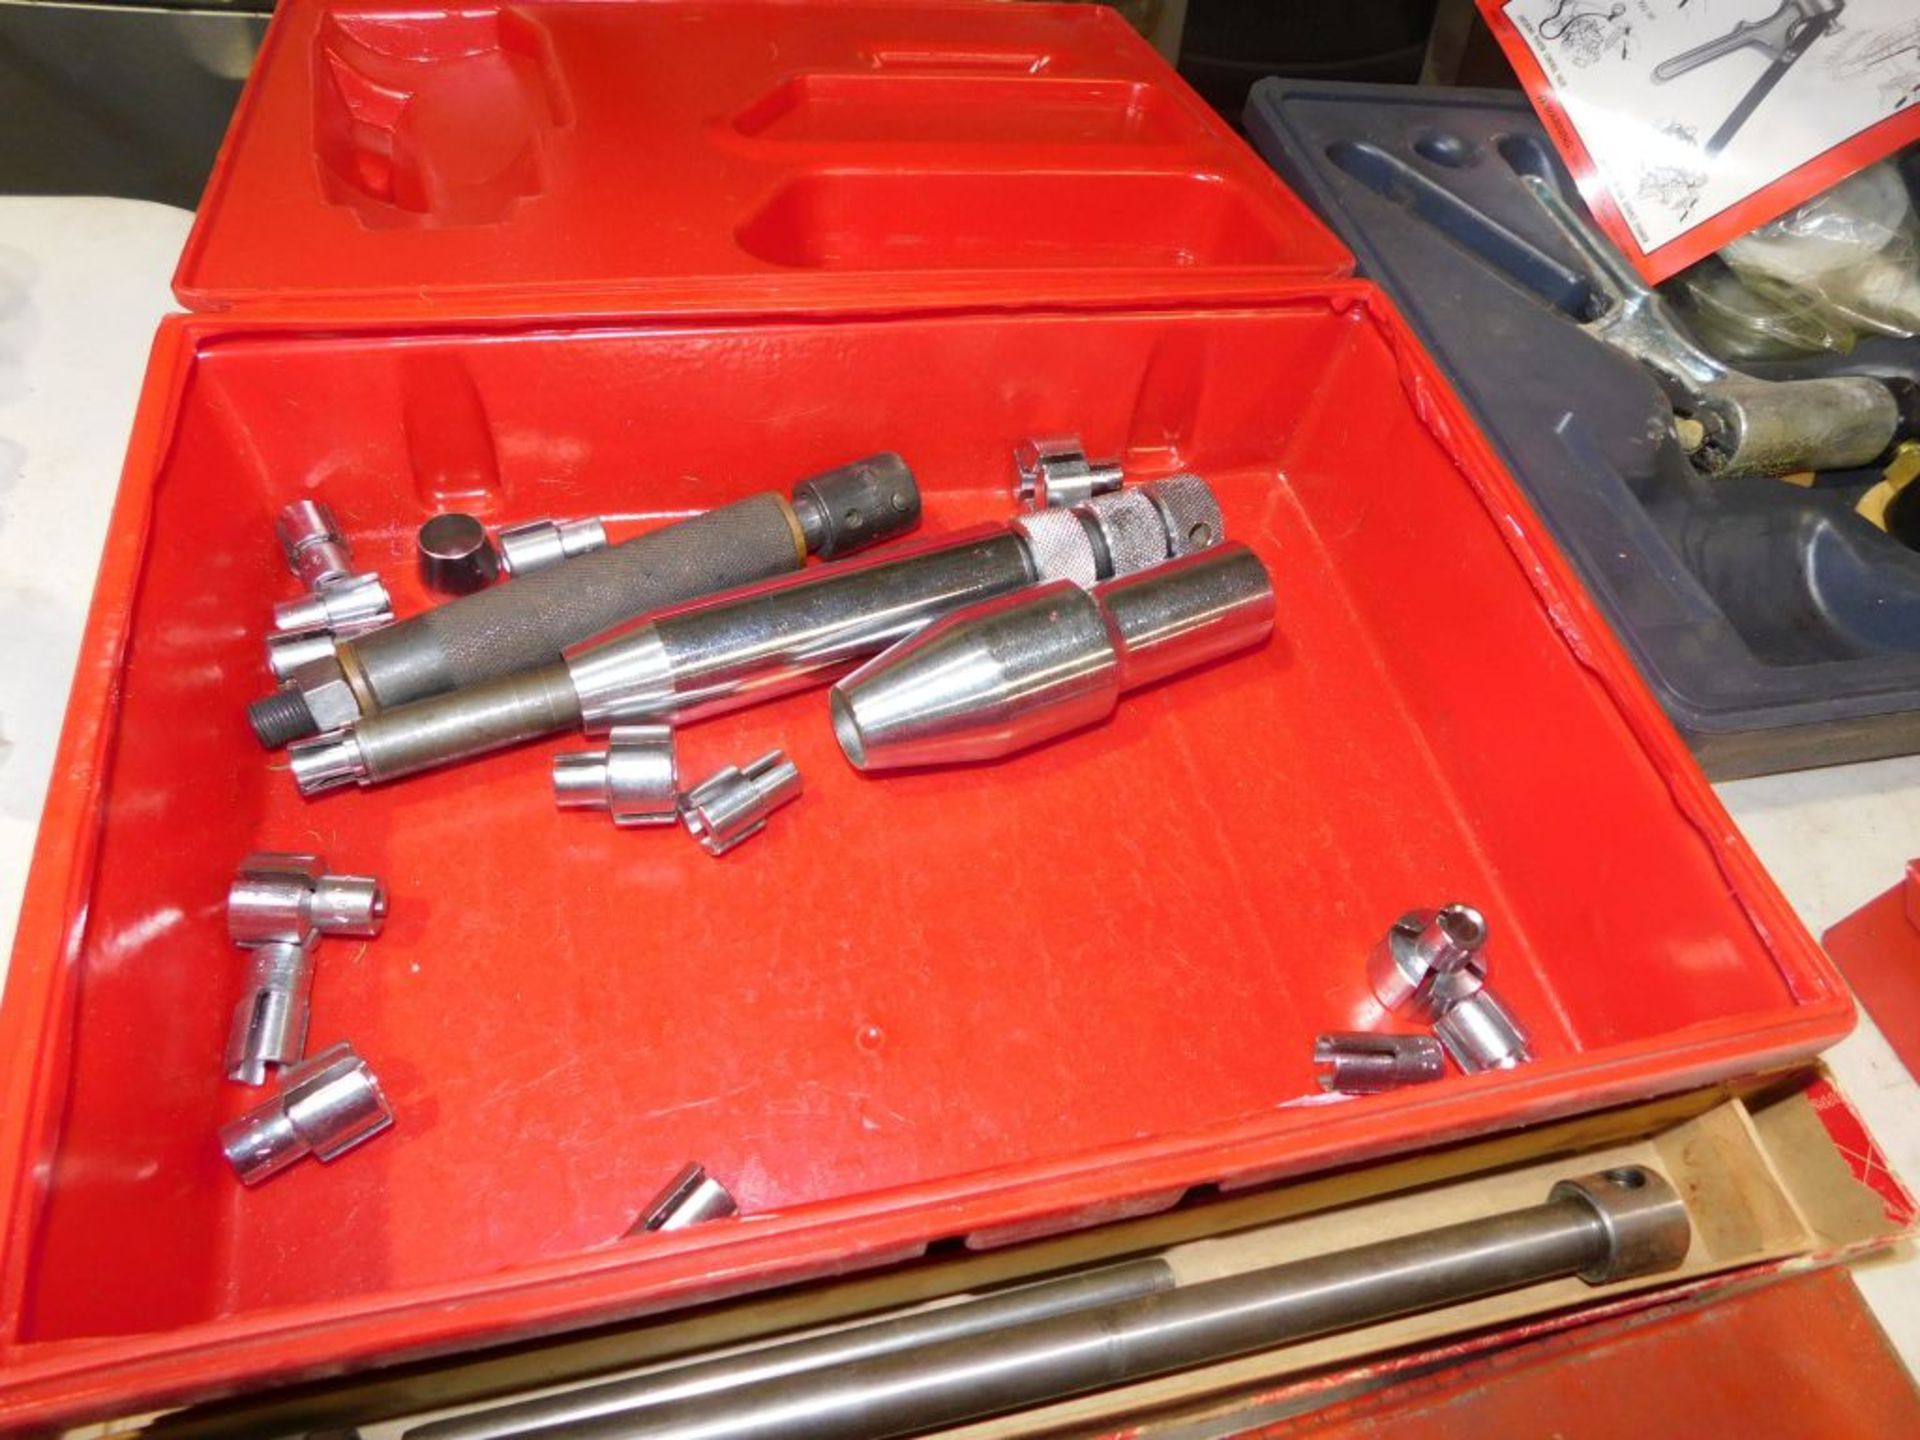 Snap-On punch set.